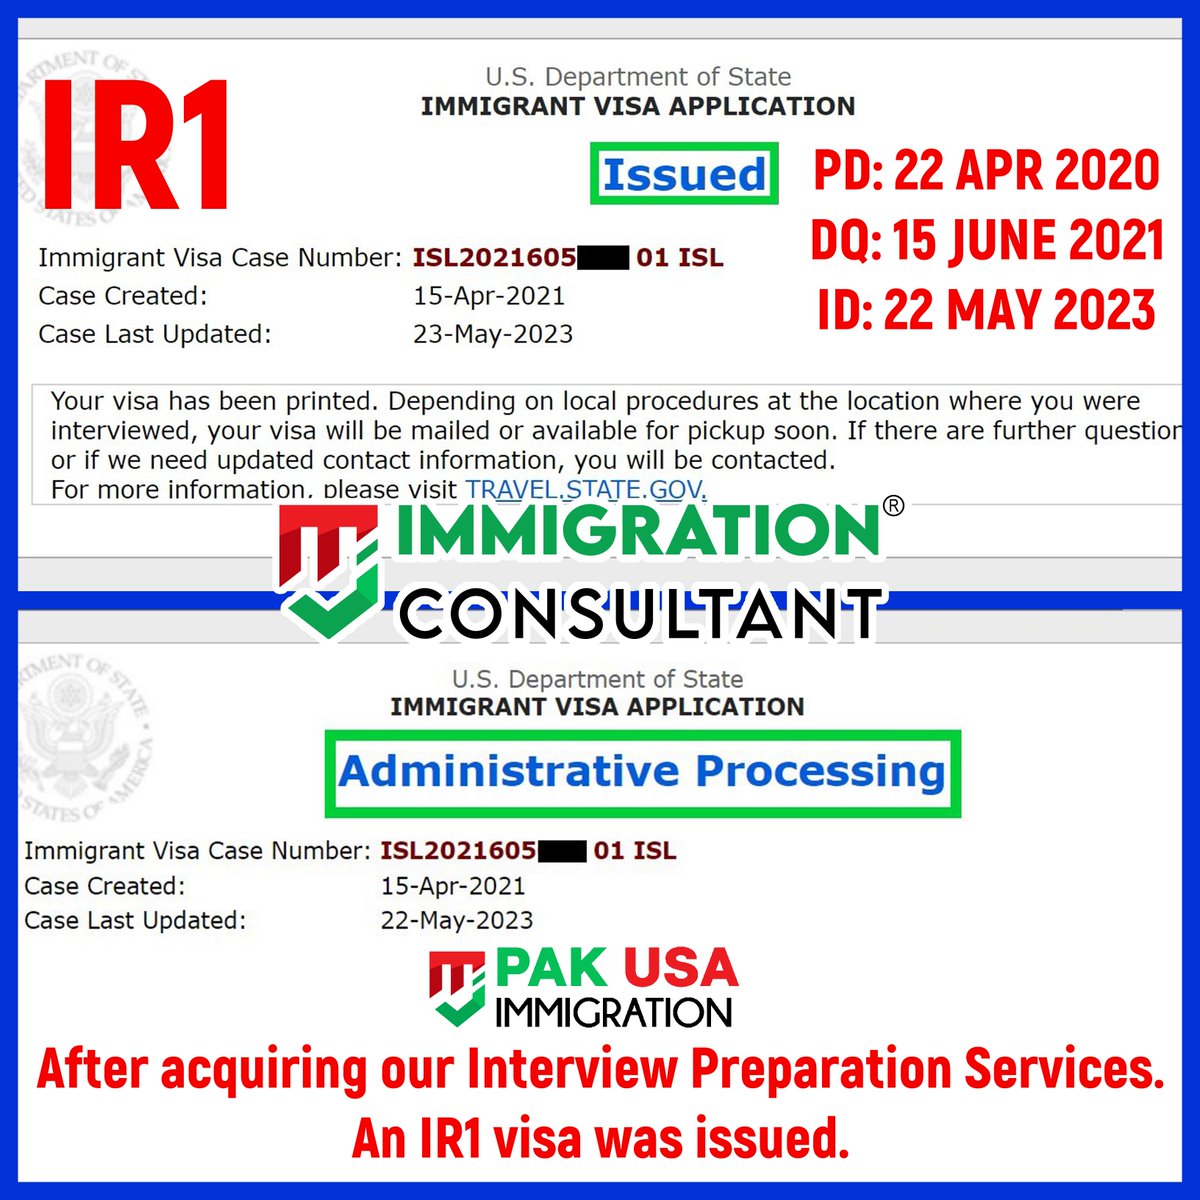 IR1 VISA ISSUED:
After acquiring our INTERVIEW PREPARATION SERVICES, an IR1 Visa was ISSUED today.

#usimmigration #PakUSAImmigration #MJImmigrationConsultant #F2A #IR1 #CR1 #IR5 #PakUSImmigration #USVisa #USCIS #NVC #immigrationconsultant #US #USA #pakusat75